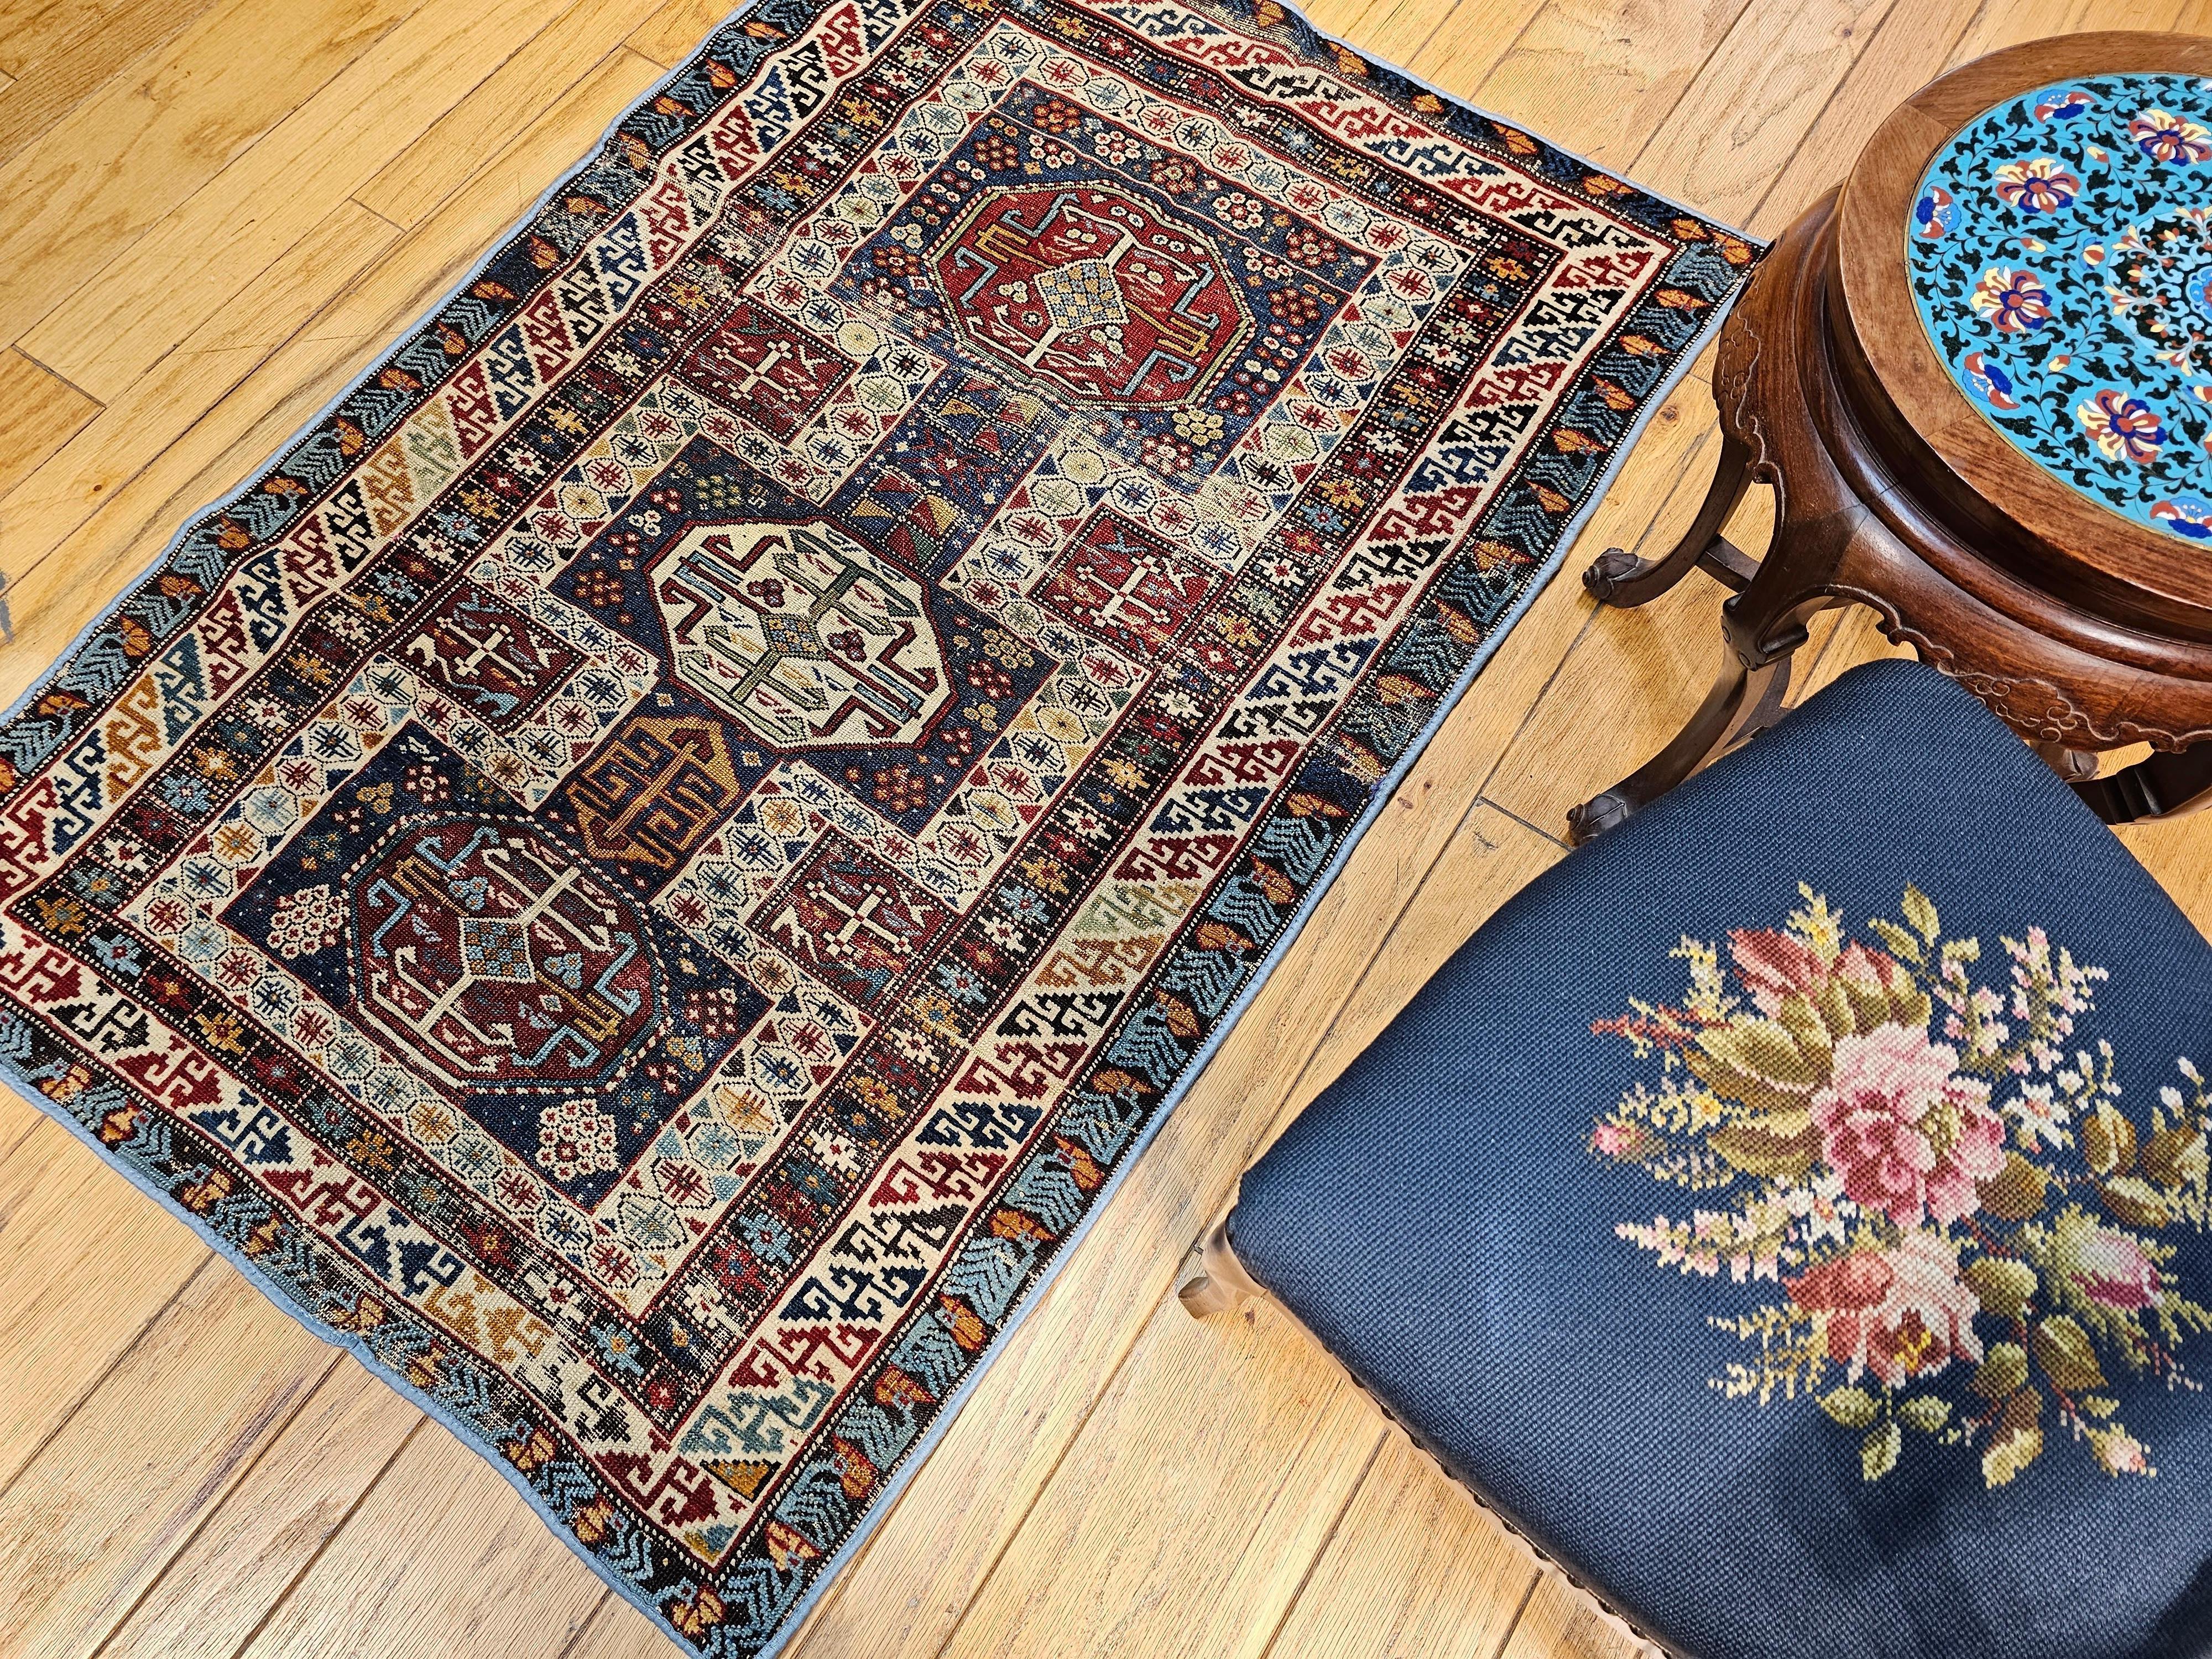  Early 1900s Caucasian Kuba Area Rug in French Blue, Red, Ivory, Yellow For Sale 6